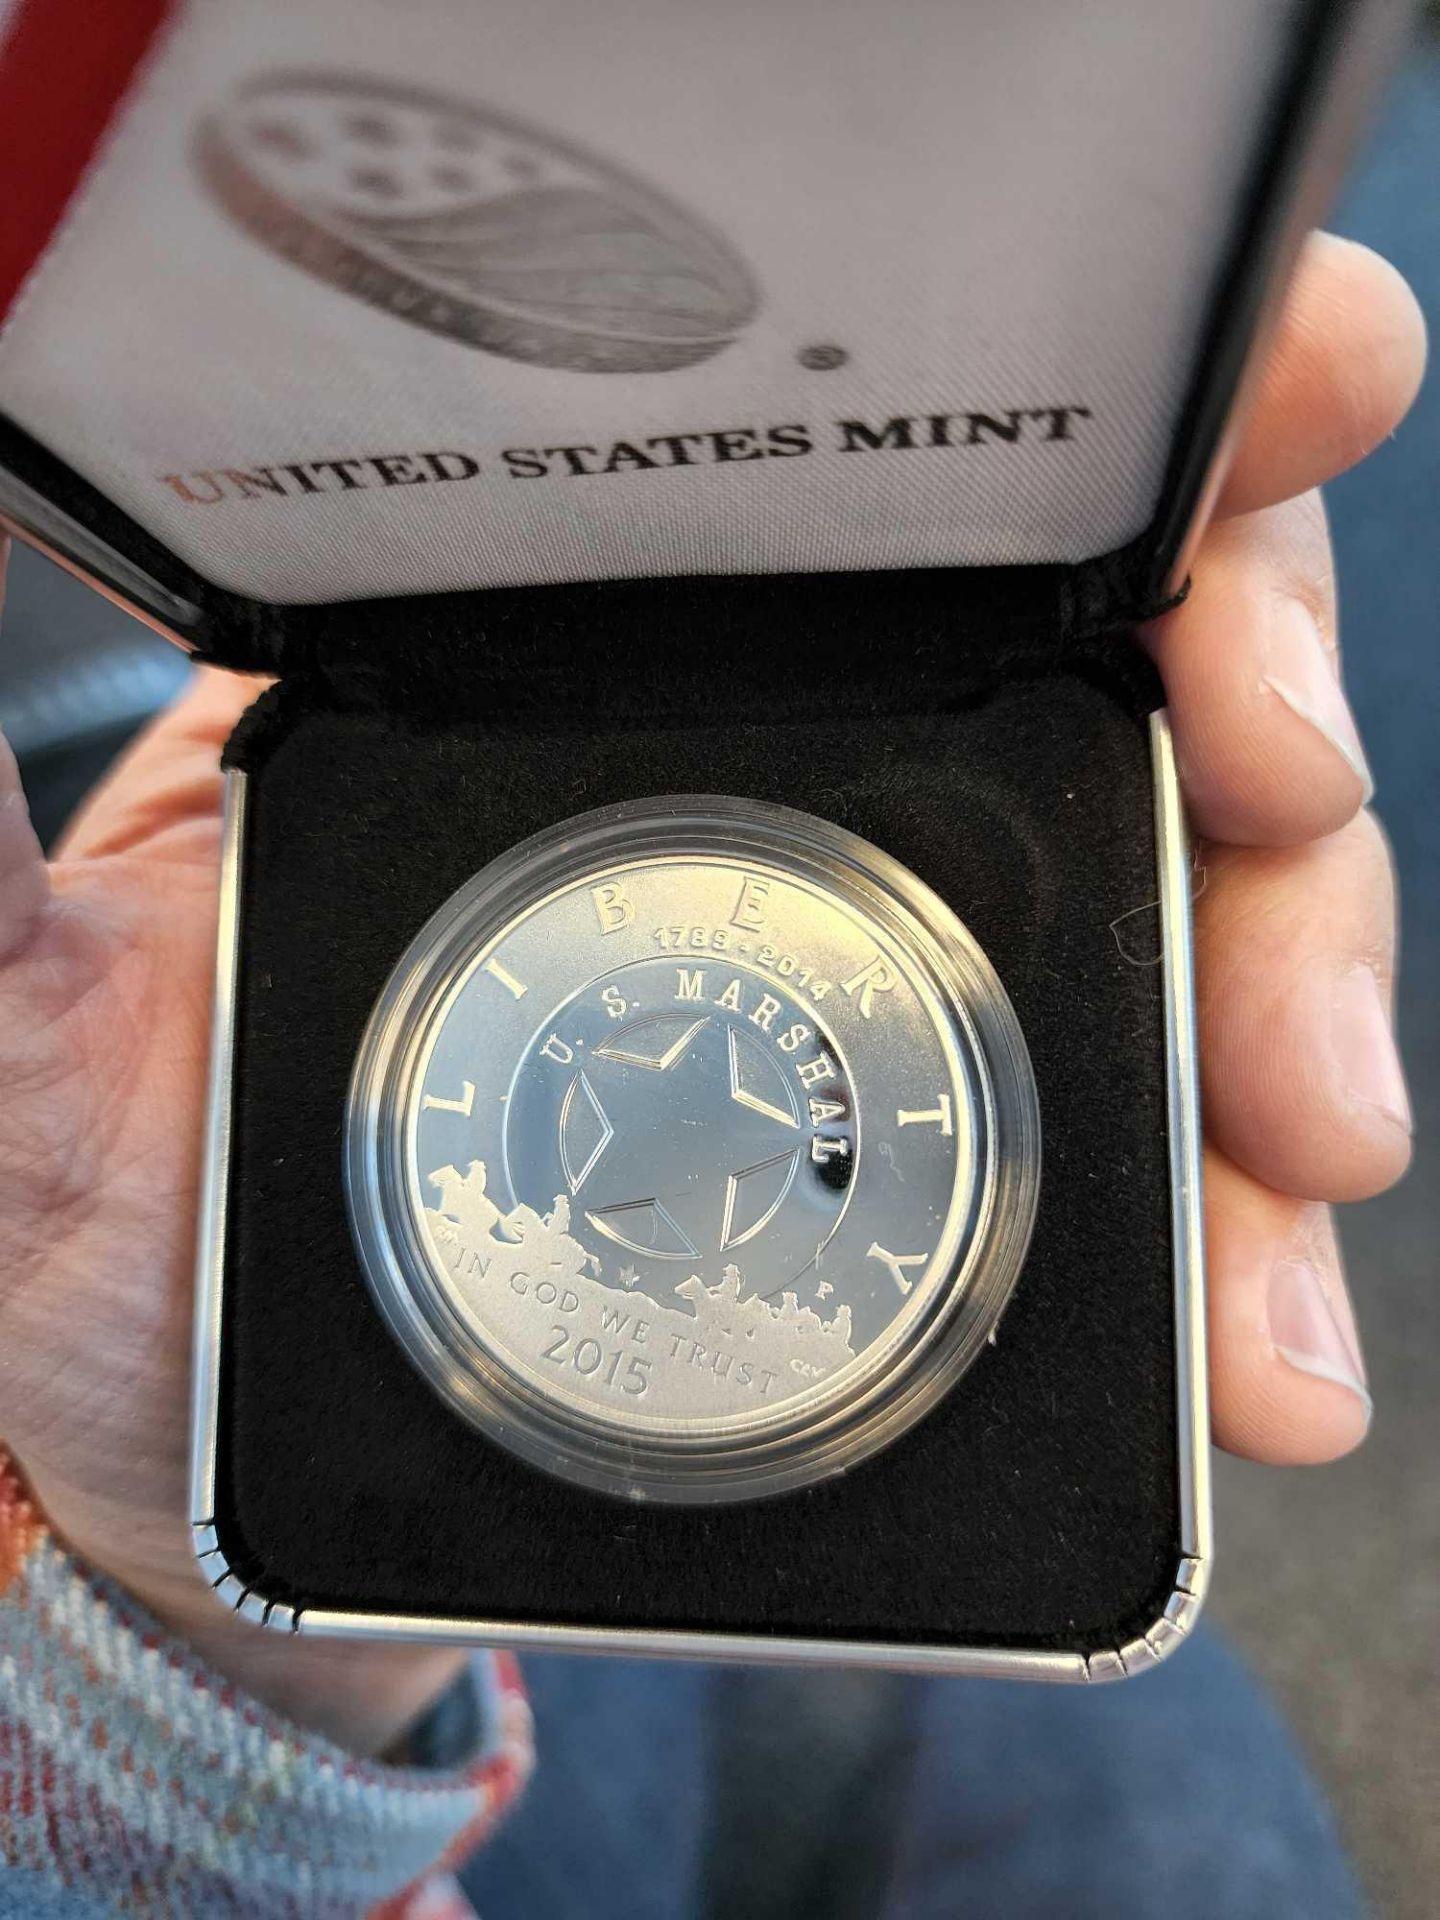 2015 US Marshals Mint Silver Coin - Image 5 of 5